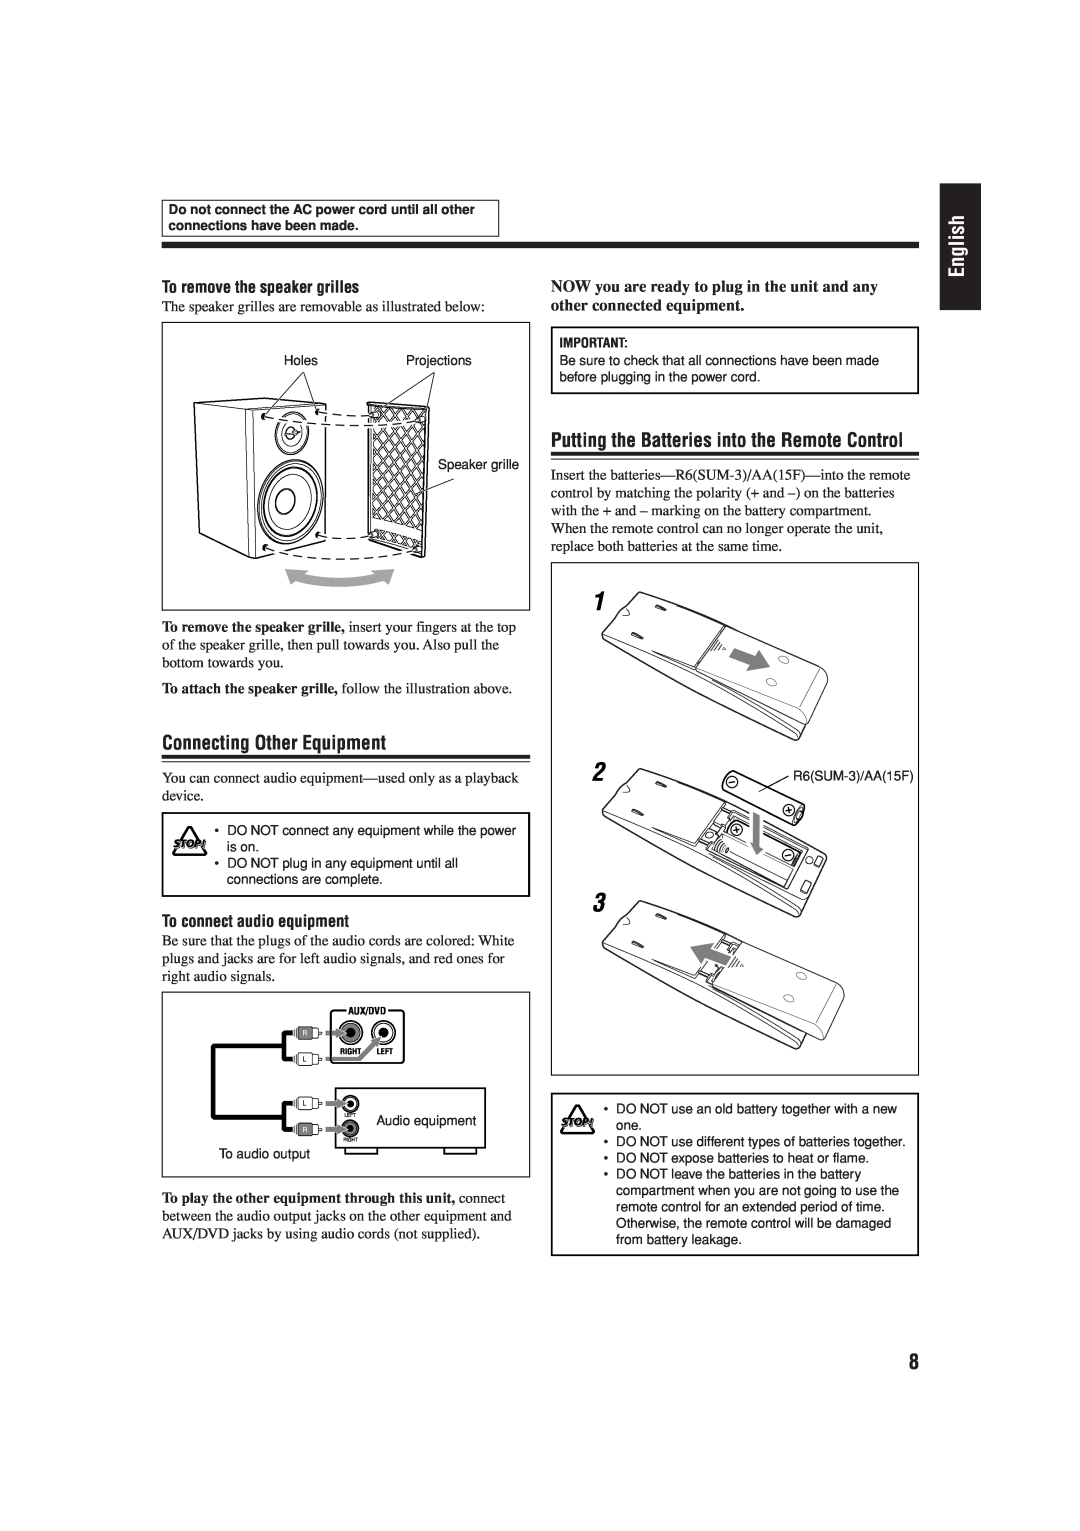 JVC CA-FSS57, GVT0134-001B manual English, Connecting Other Equipment, Putting the Batteries into the Remote Control 